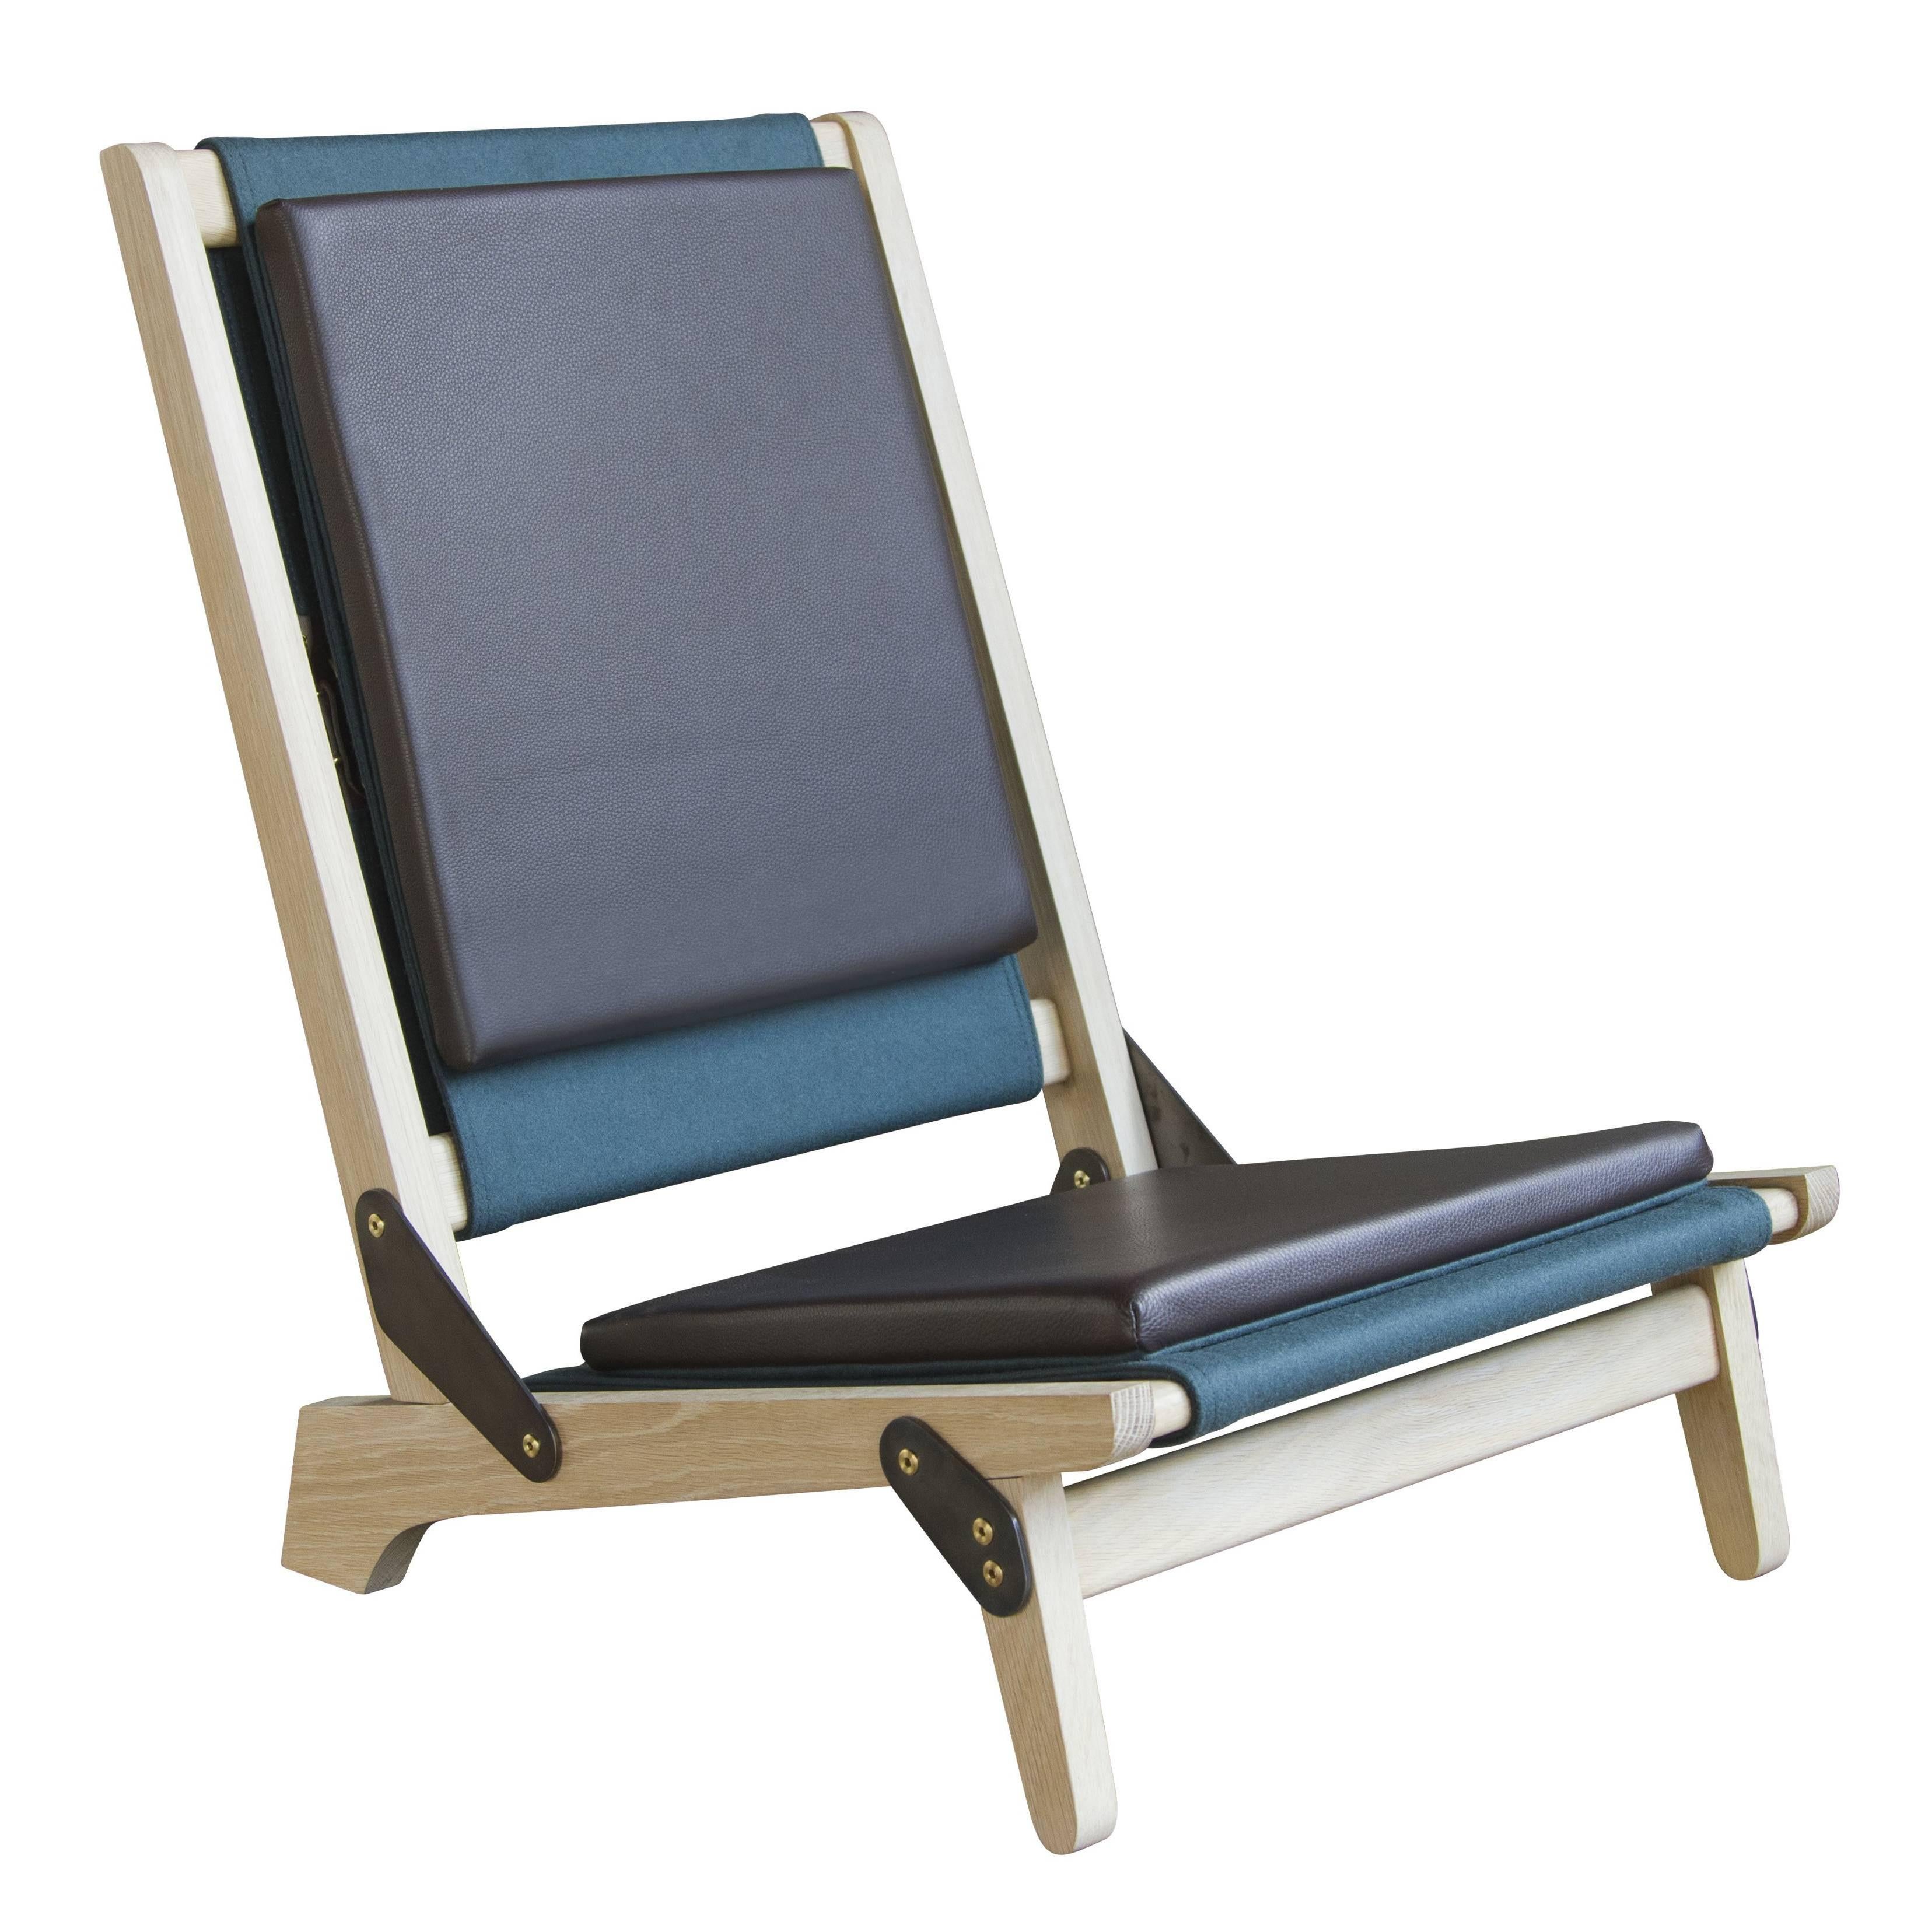 Officer's Field Set Folding Chair - handcrafted by Richard Wrightman Design